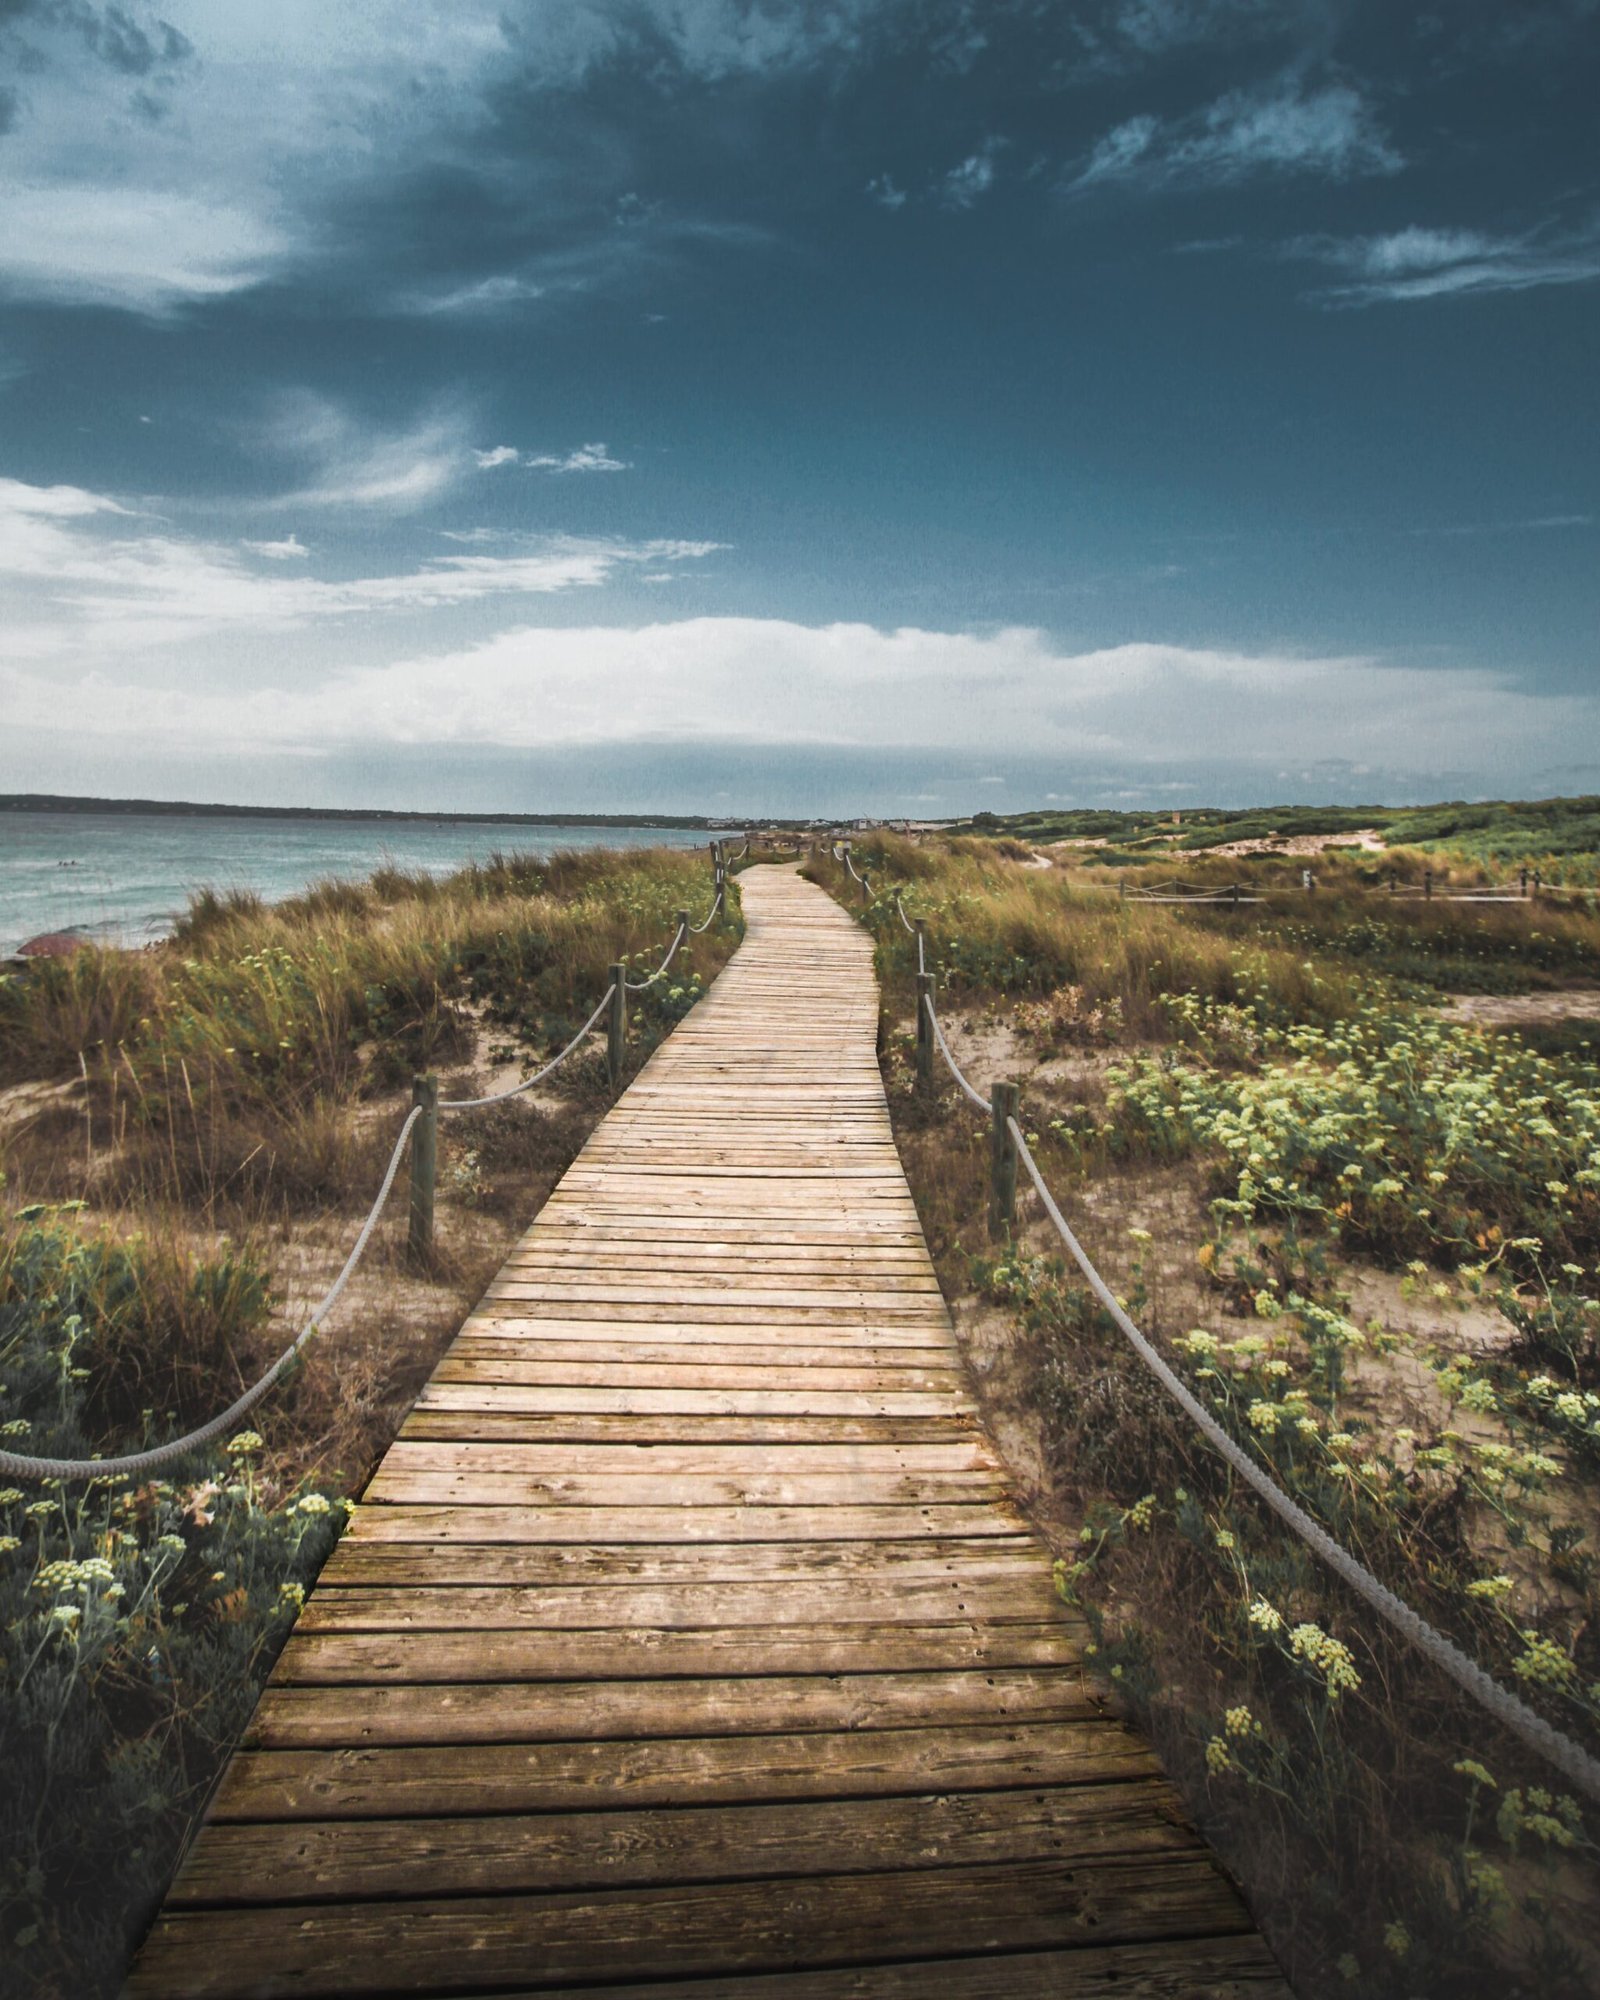 A sweeping wooden path weaves its way towards a beach in the background